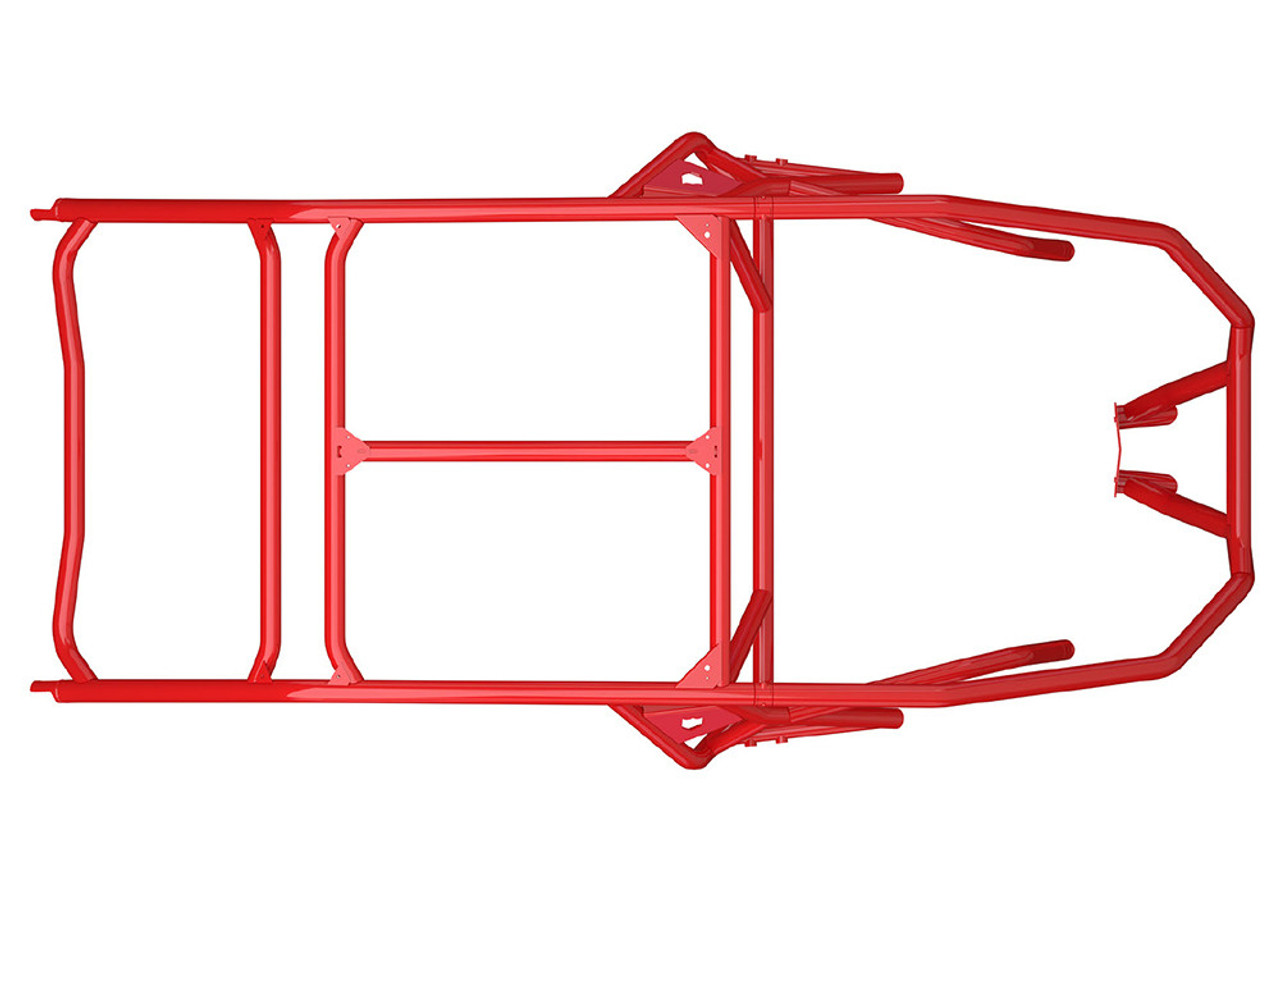 2020 Rzr Pro Xp Cage System